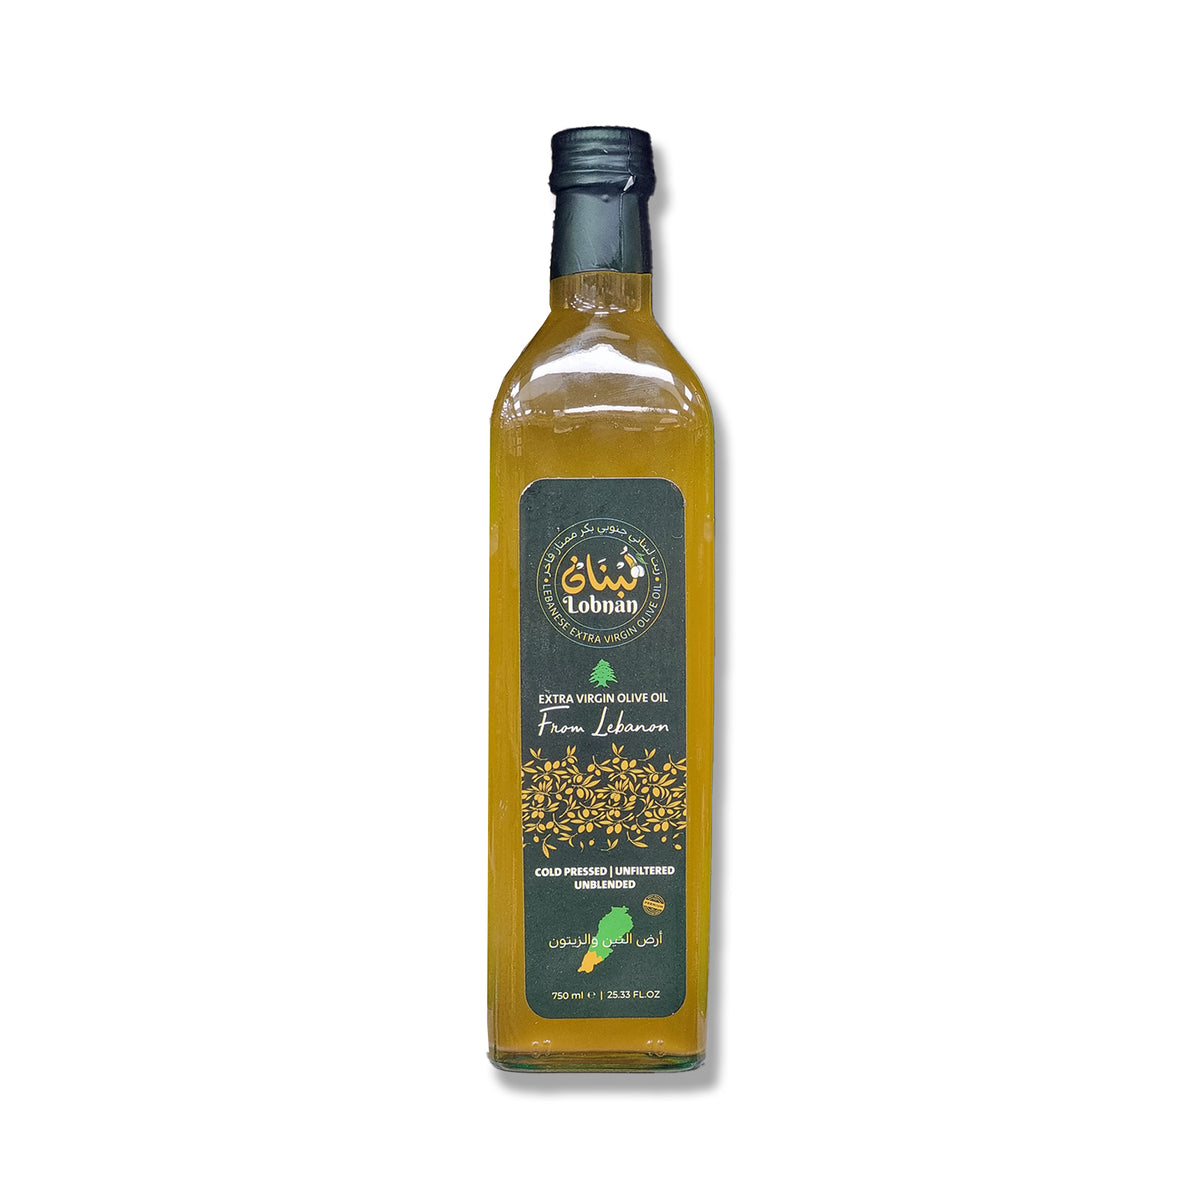 Damasgate wholesale - Sofra extra virgin olive oil now available in  Damasgate. To place an order please contact our sales team Tel. 020  85758800 #olives #oil #olives_oil #sofra